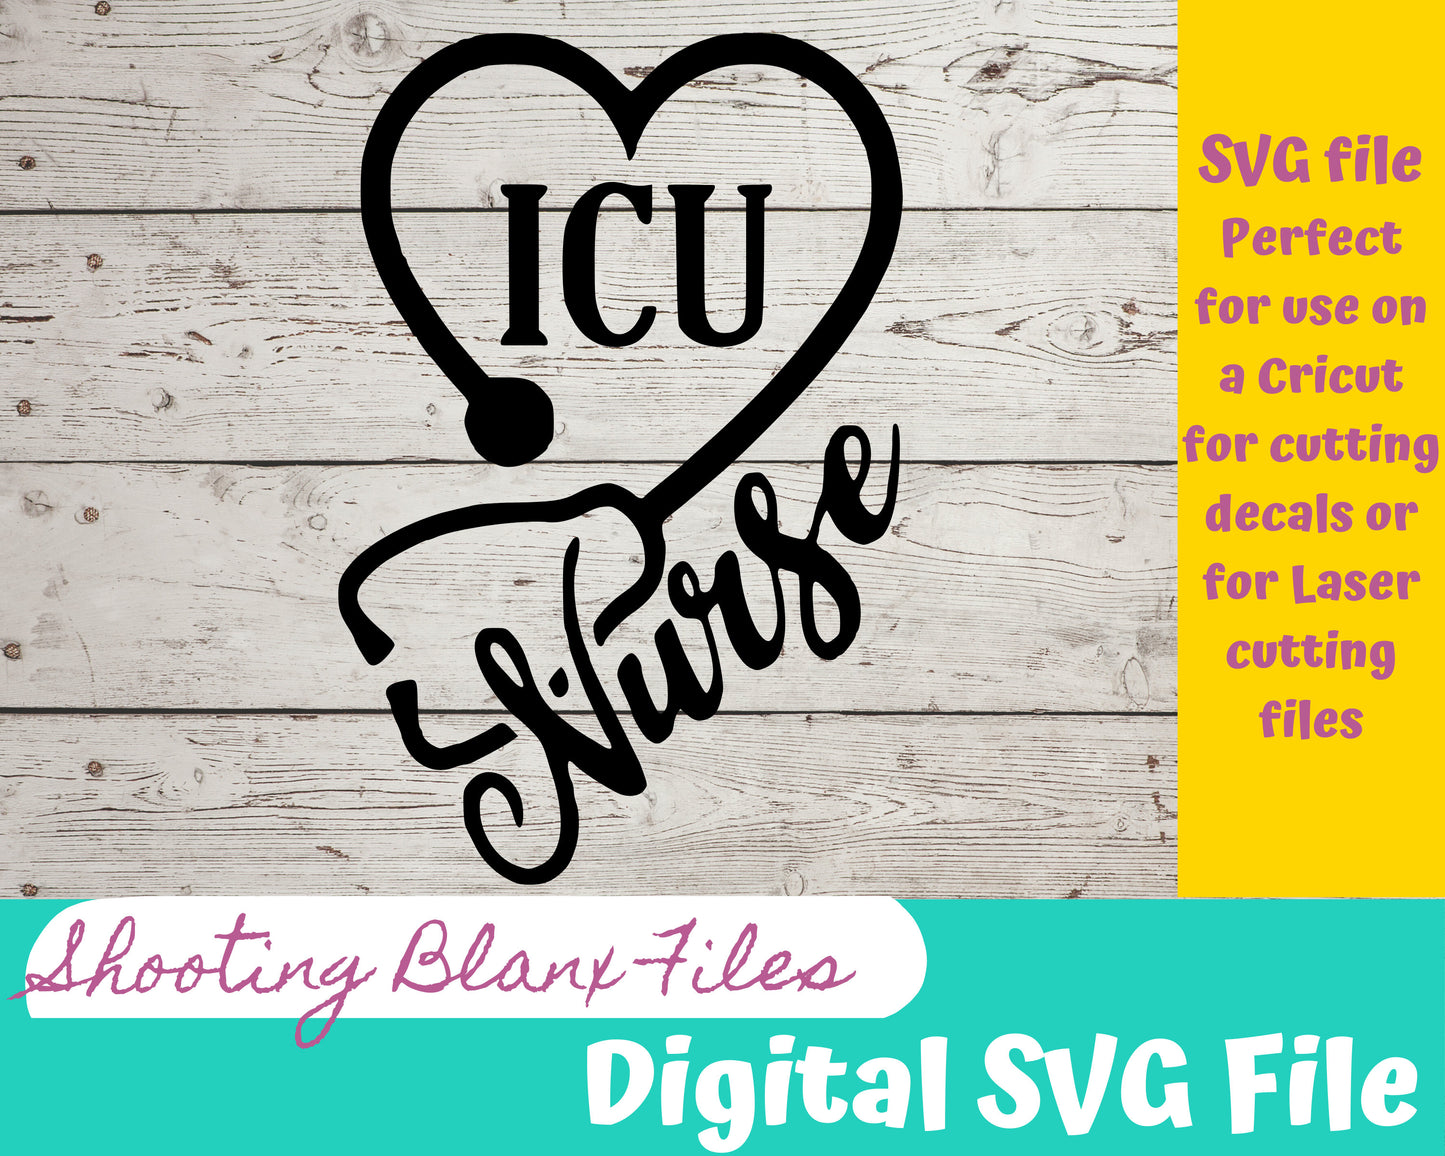 Nurse SVG Bundle perfect for Cricut, Cameo, or Silhouette also for laser engraving Glowforge, decal template shirts svg, mug, coffee, scrubs